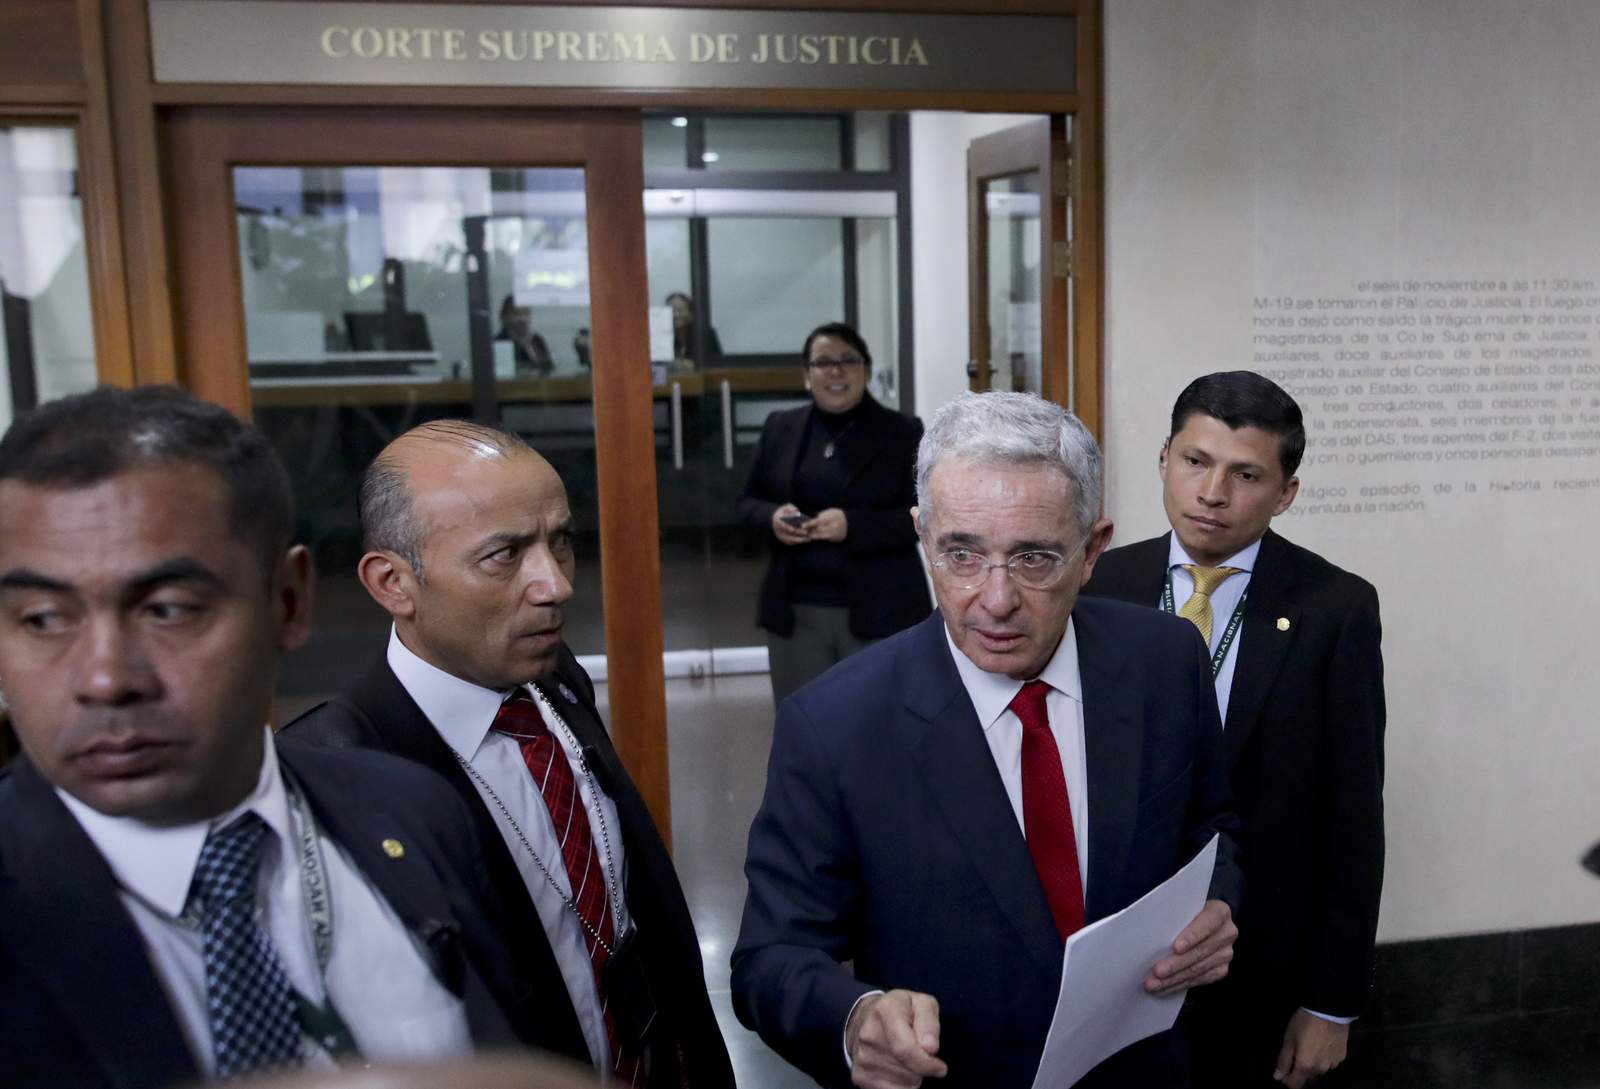 Court record in Colombia reveals Uribe's mounting legal bind